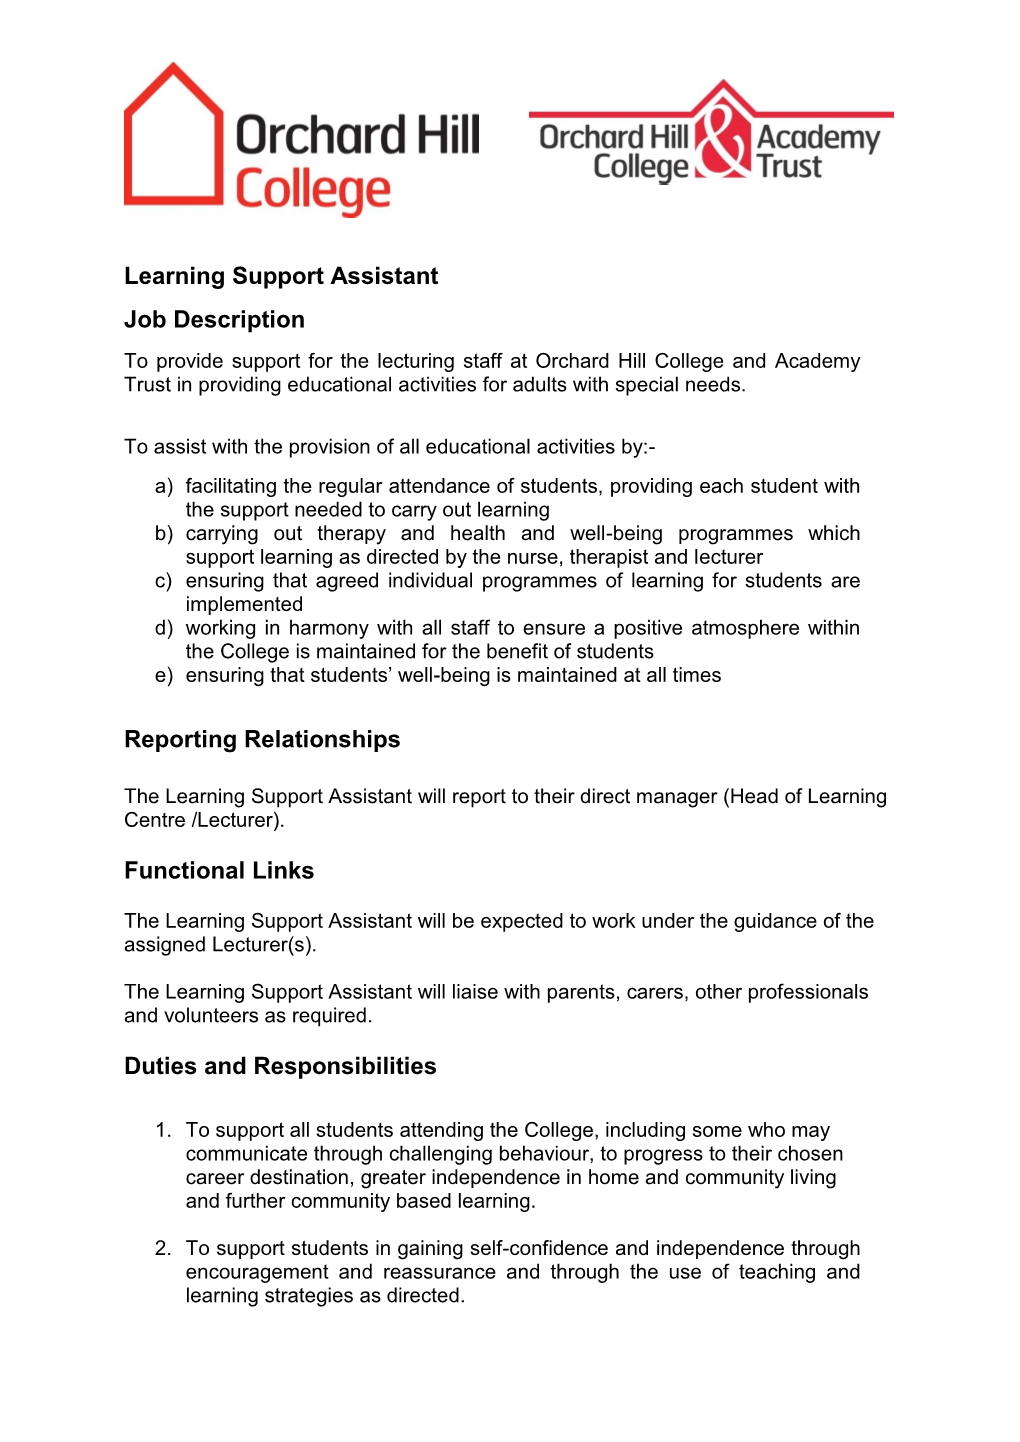 Learning Support Assistant Job Description Reporting